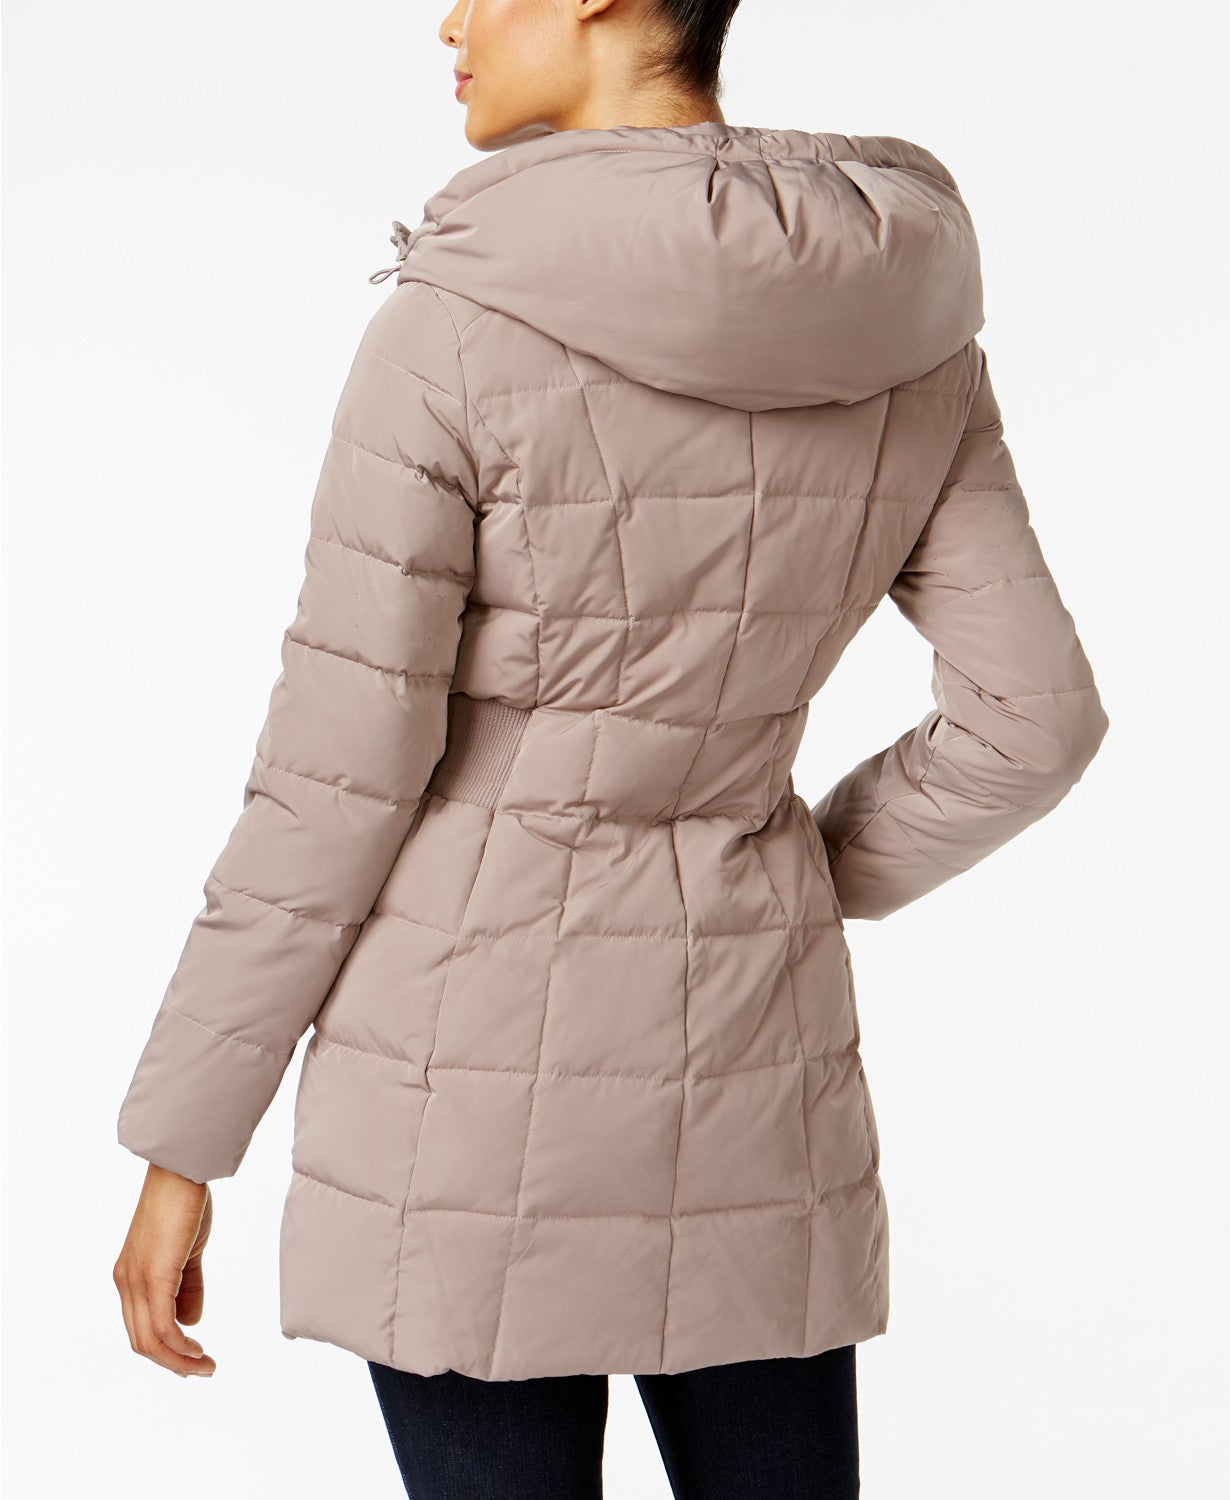 Cole Haan Womens Hooded Down Puffer Coat Cashew Small *Missing a Snap*